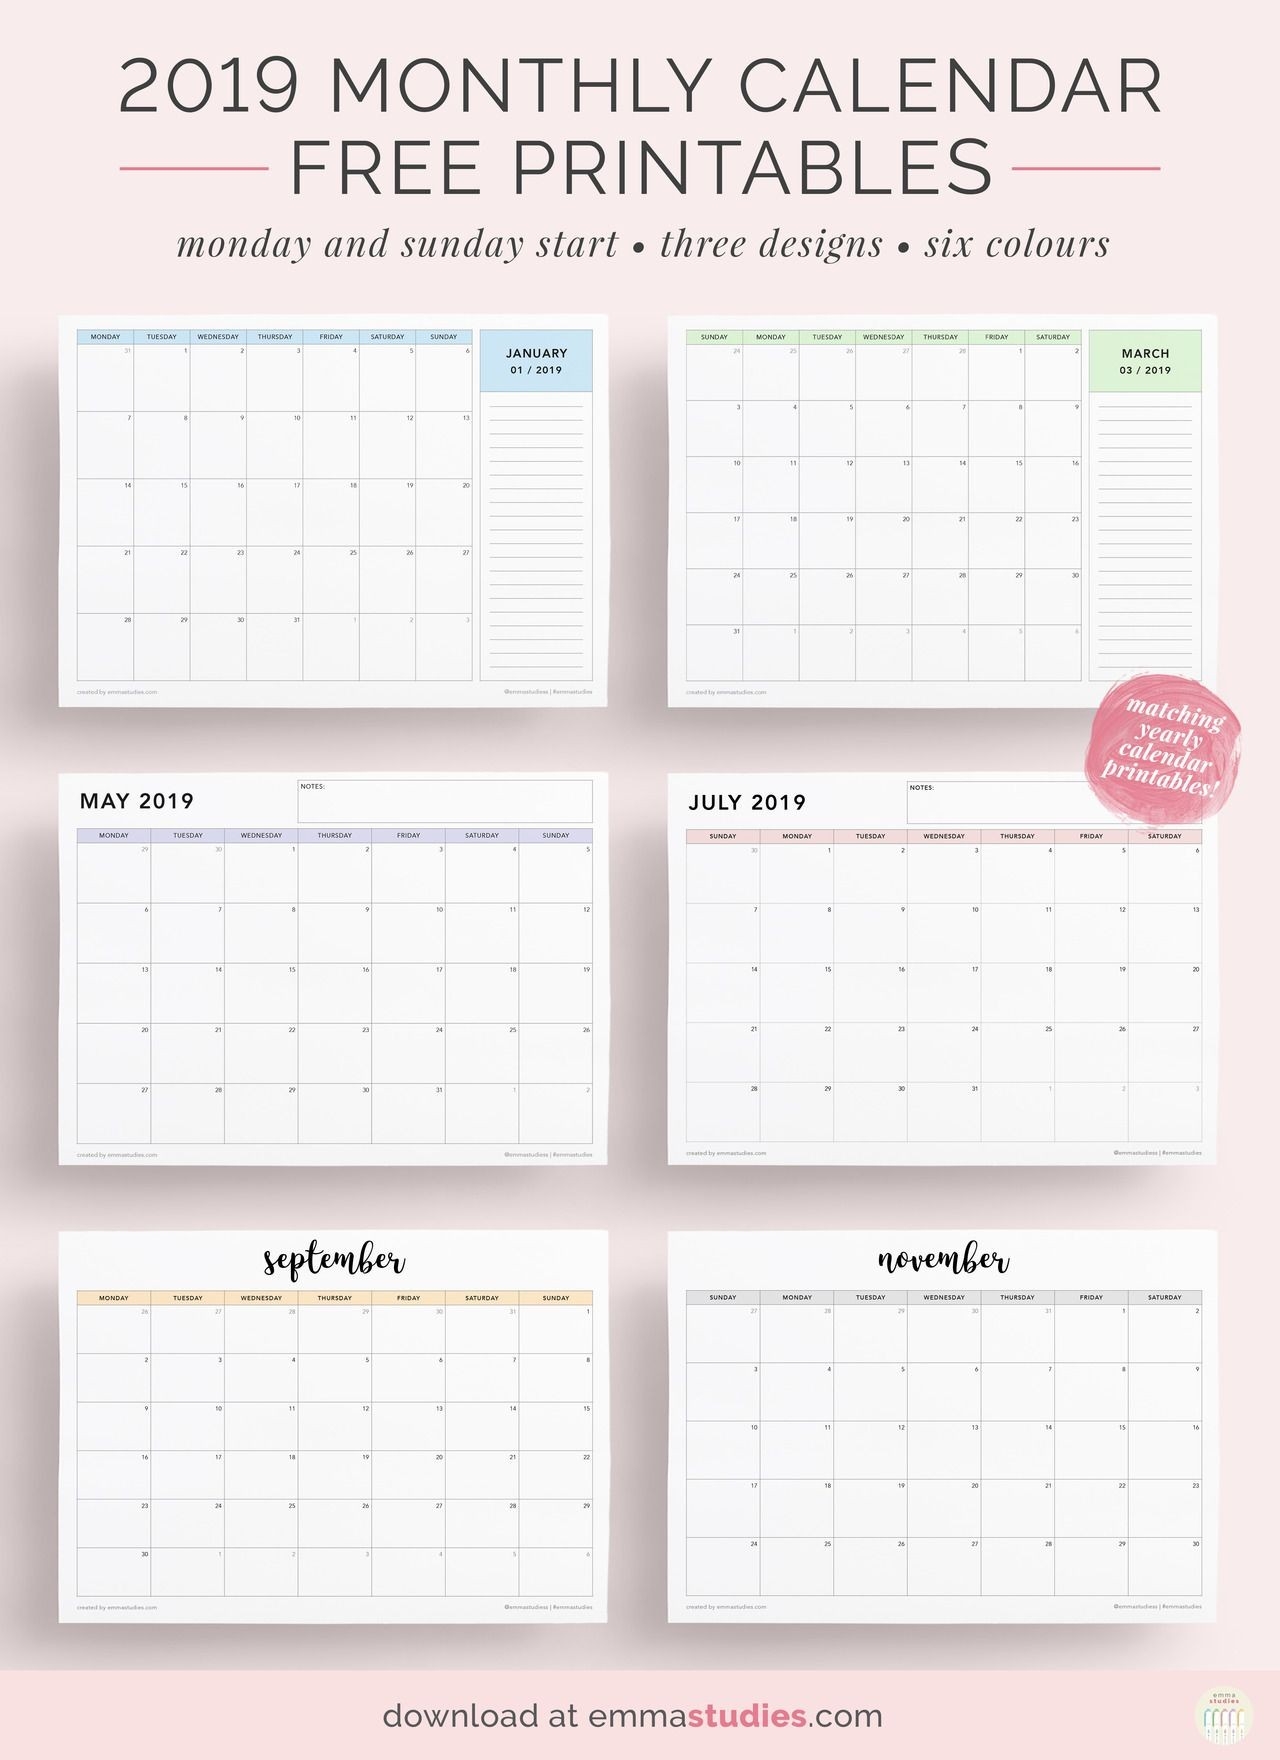 Free 2019 Monthly Landscape Calendar Printableshere Is A-Studying Monthly Calendar Template